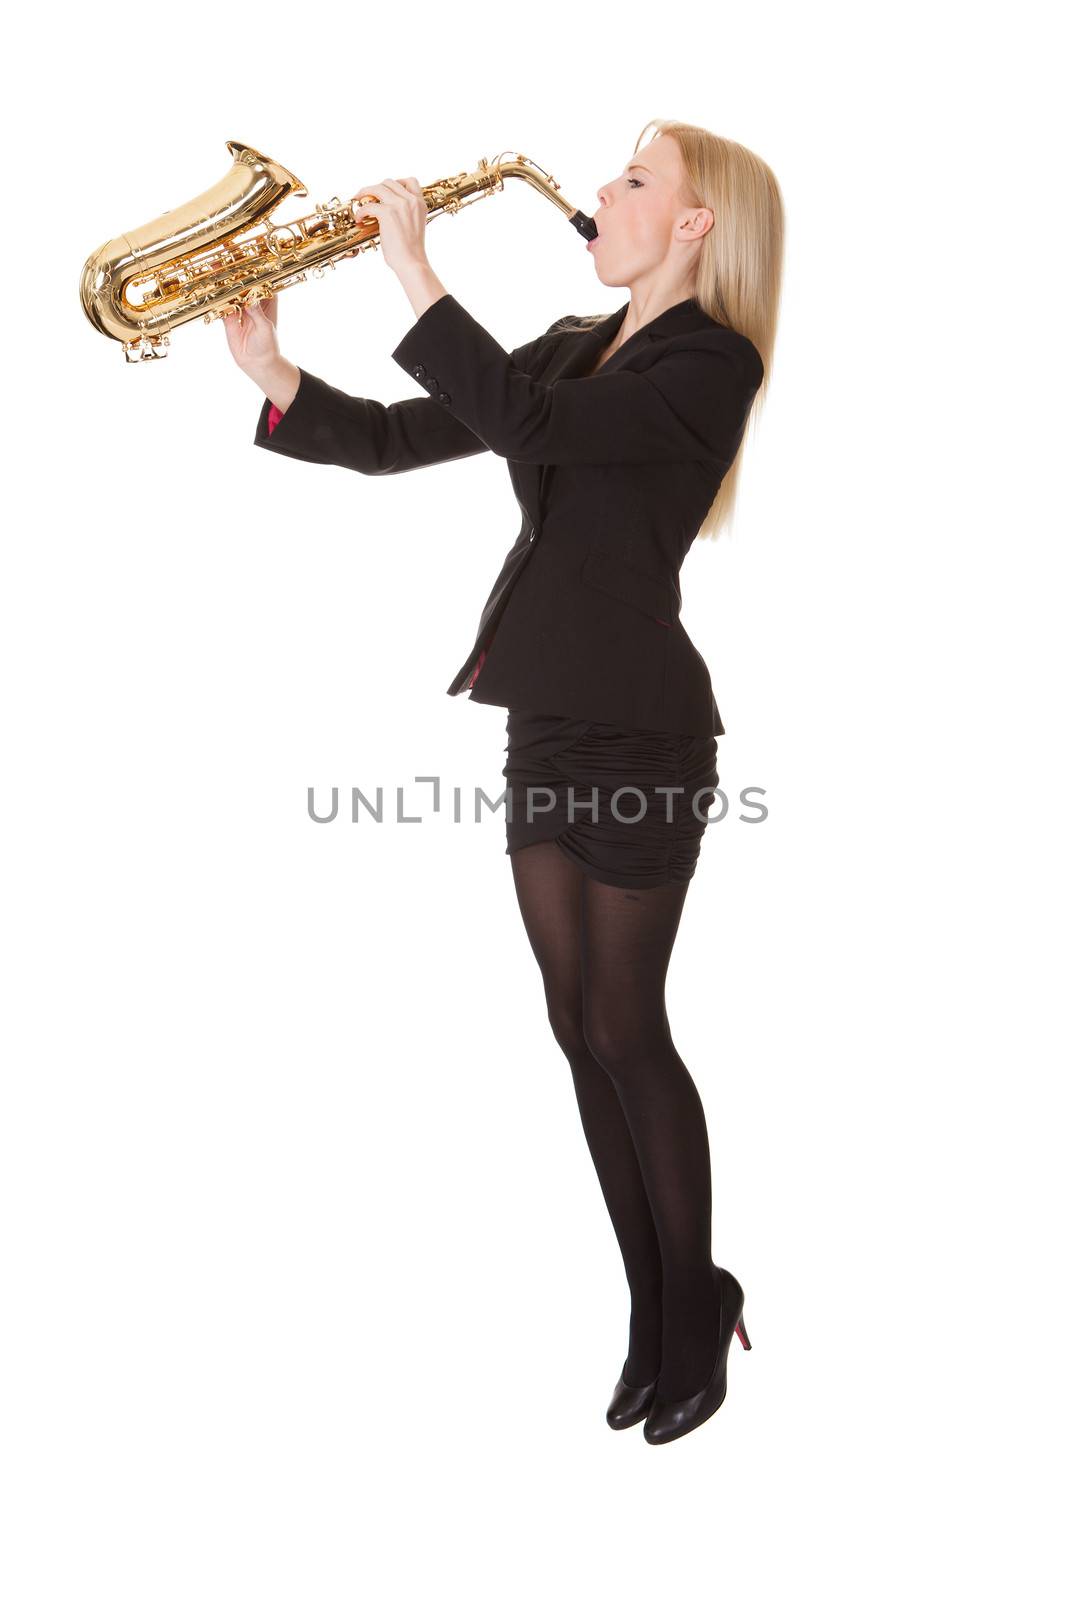 Beautiful young woman playing saxophone. Isolated on white